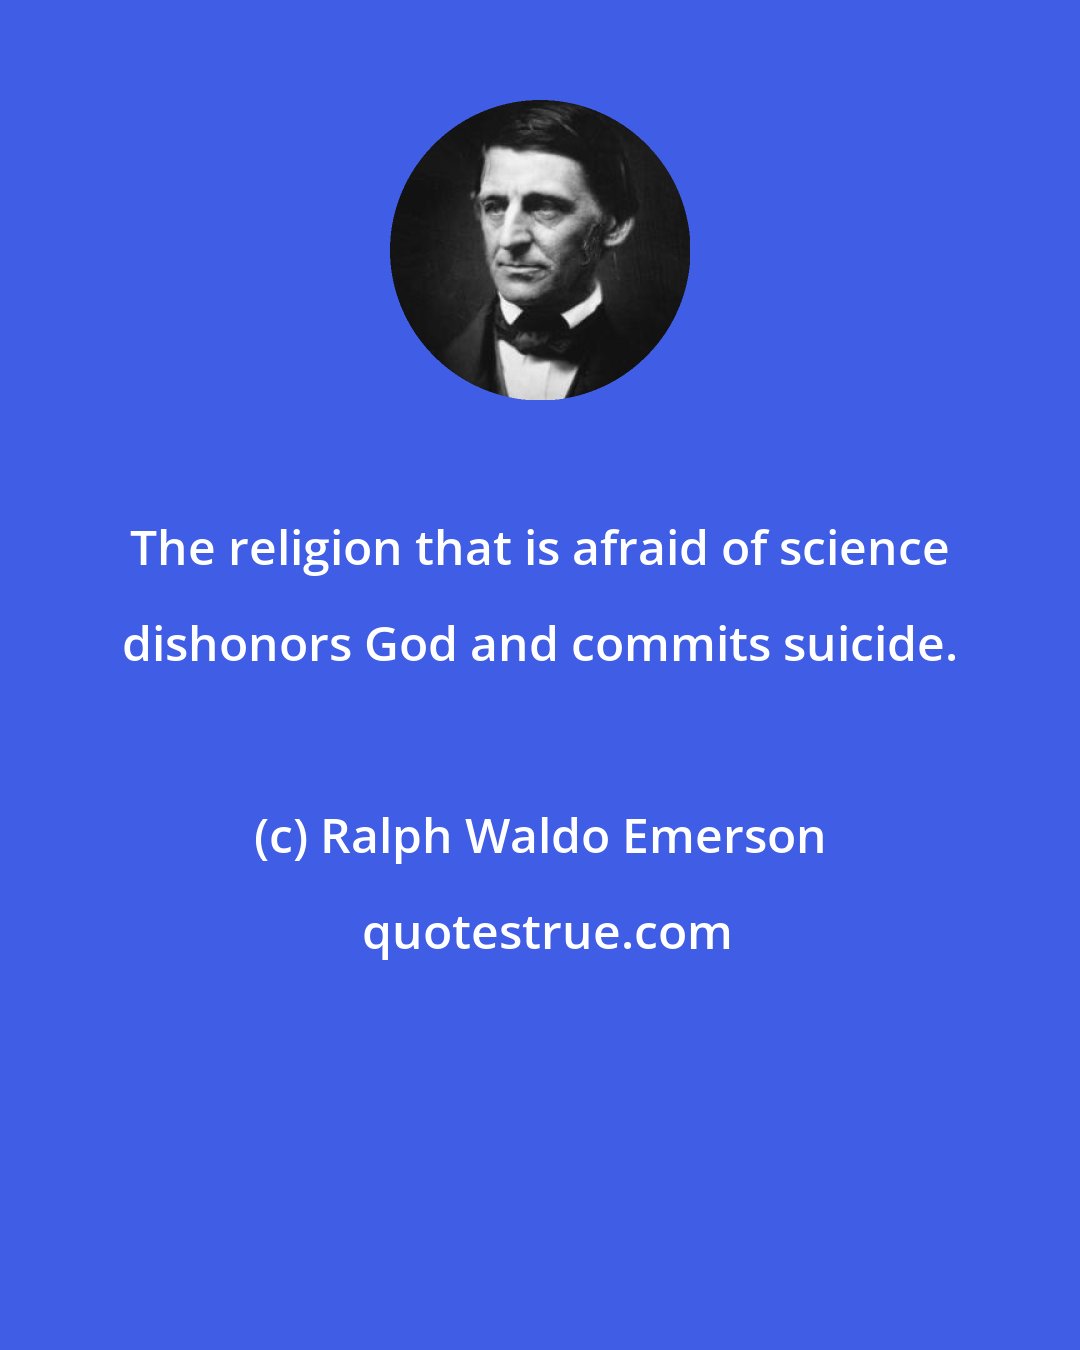 Ralph Waldo Emerson: The religion that is afraid of science dishonors God and commits suicide.